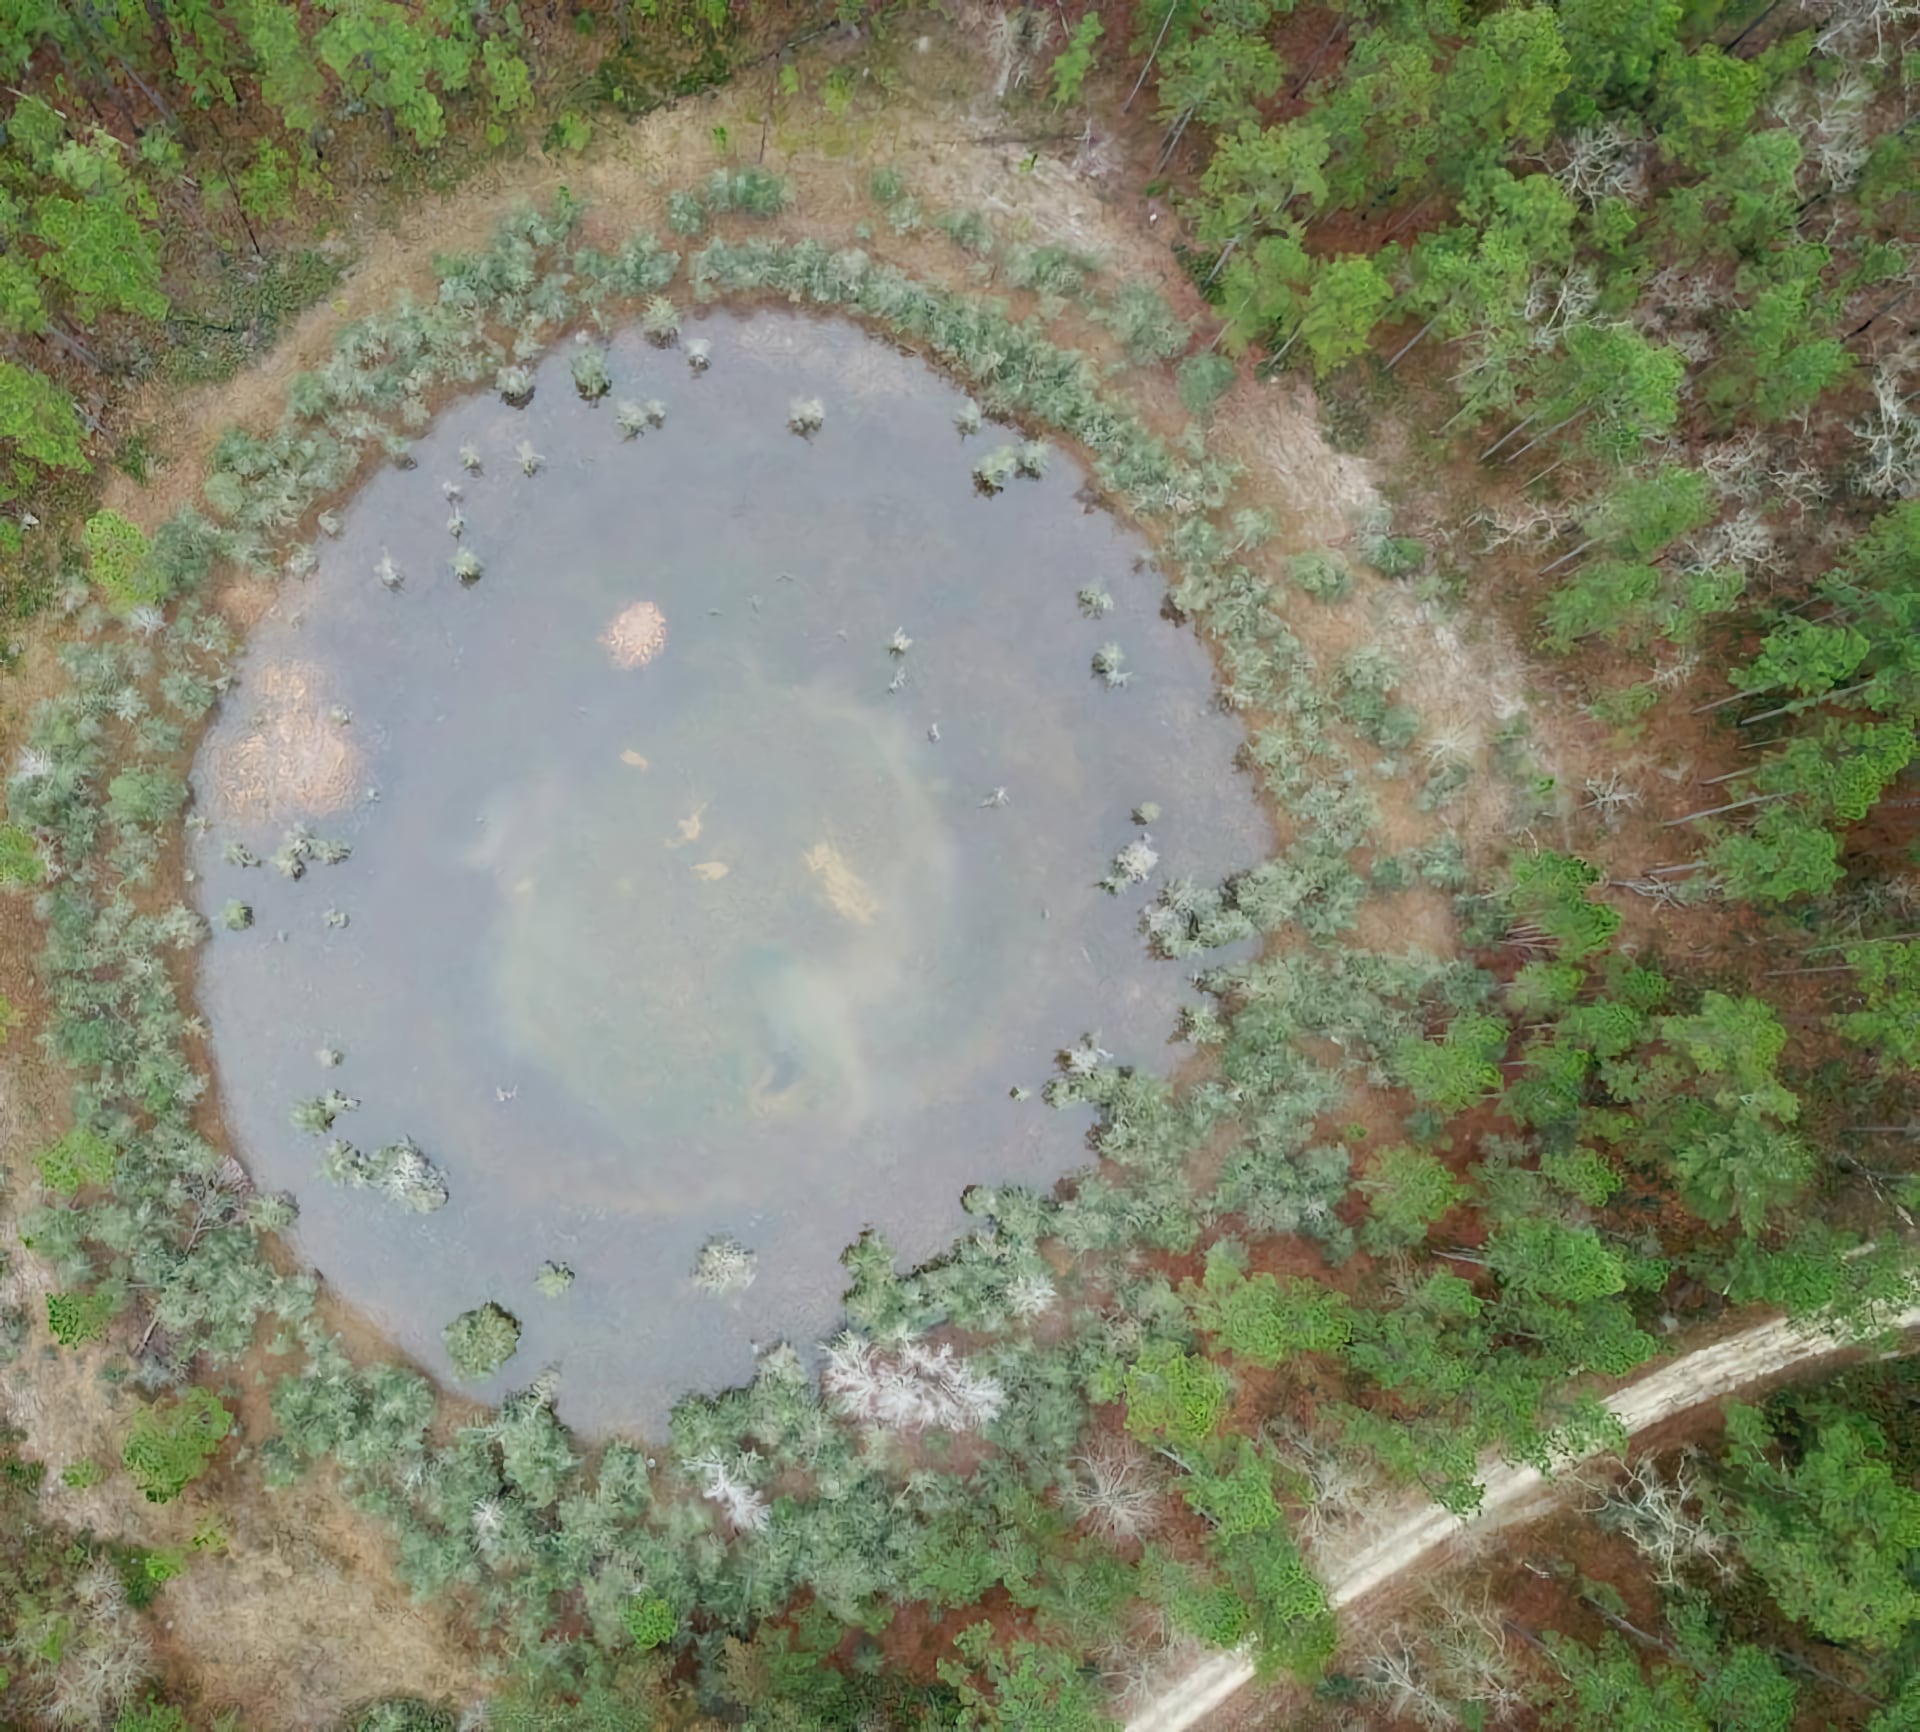 Seasonal ponds make ideal breeding sites for gopher frogs since they lack predatory fish and provide a safe refuge. Image credit: Mark Bailey (US Forest Service)